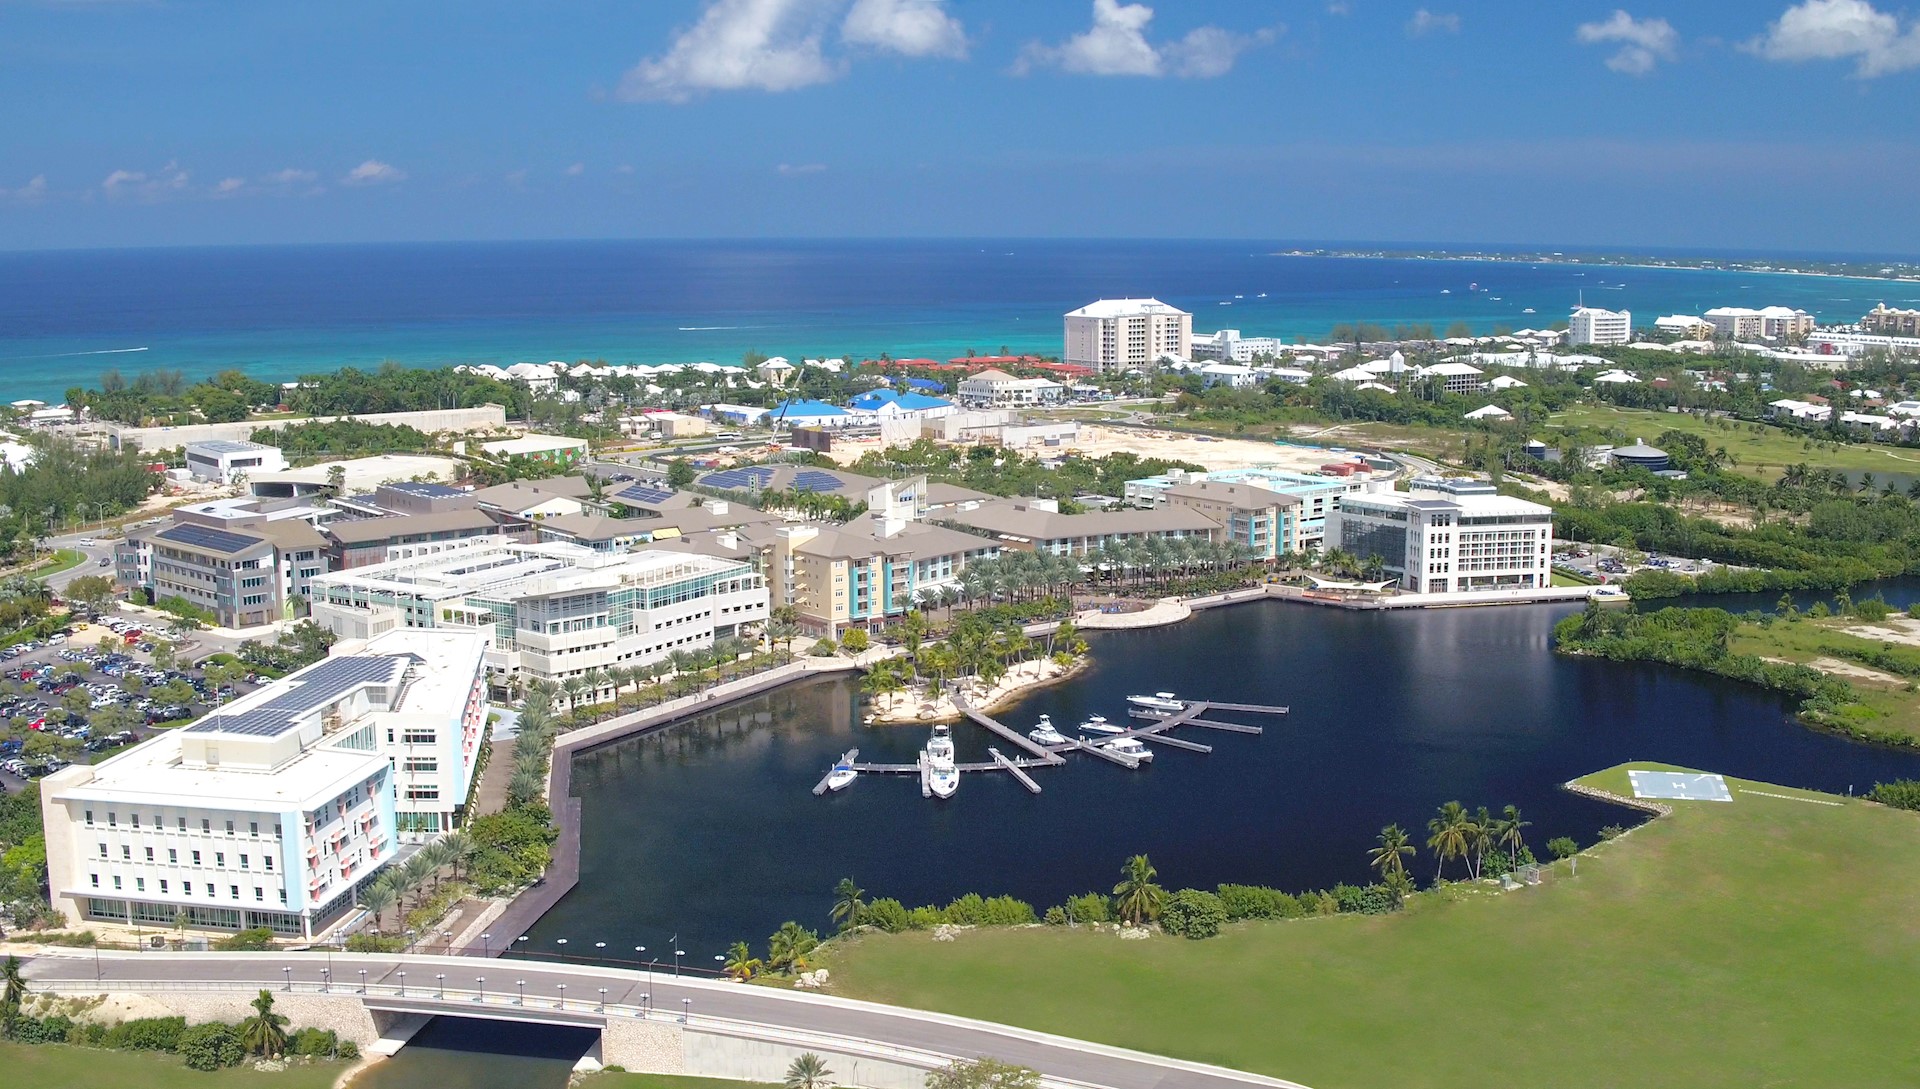 Camana Bay Commercial and residential real estate Dart